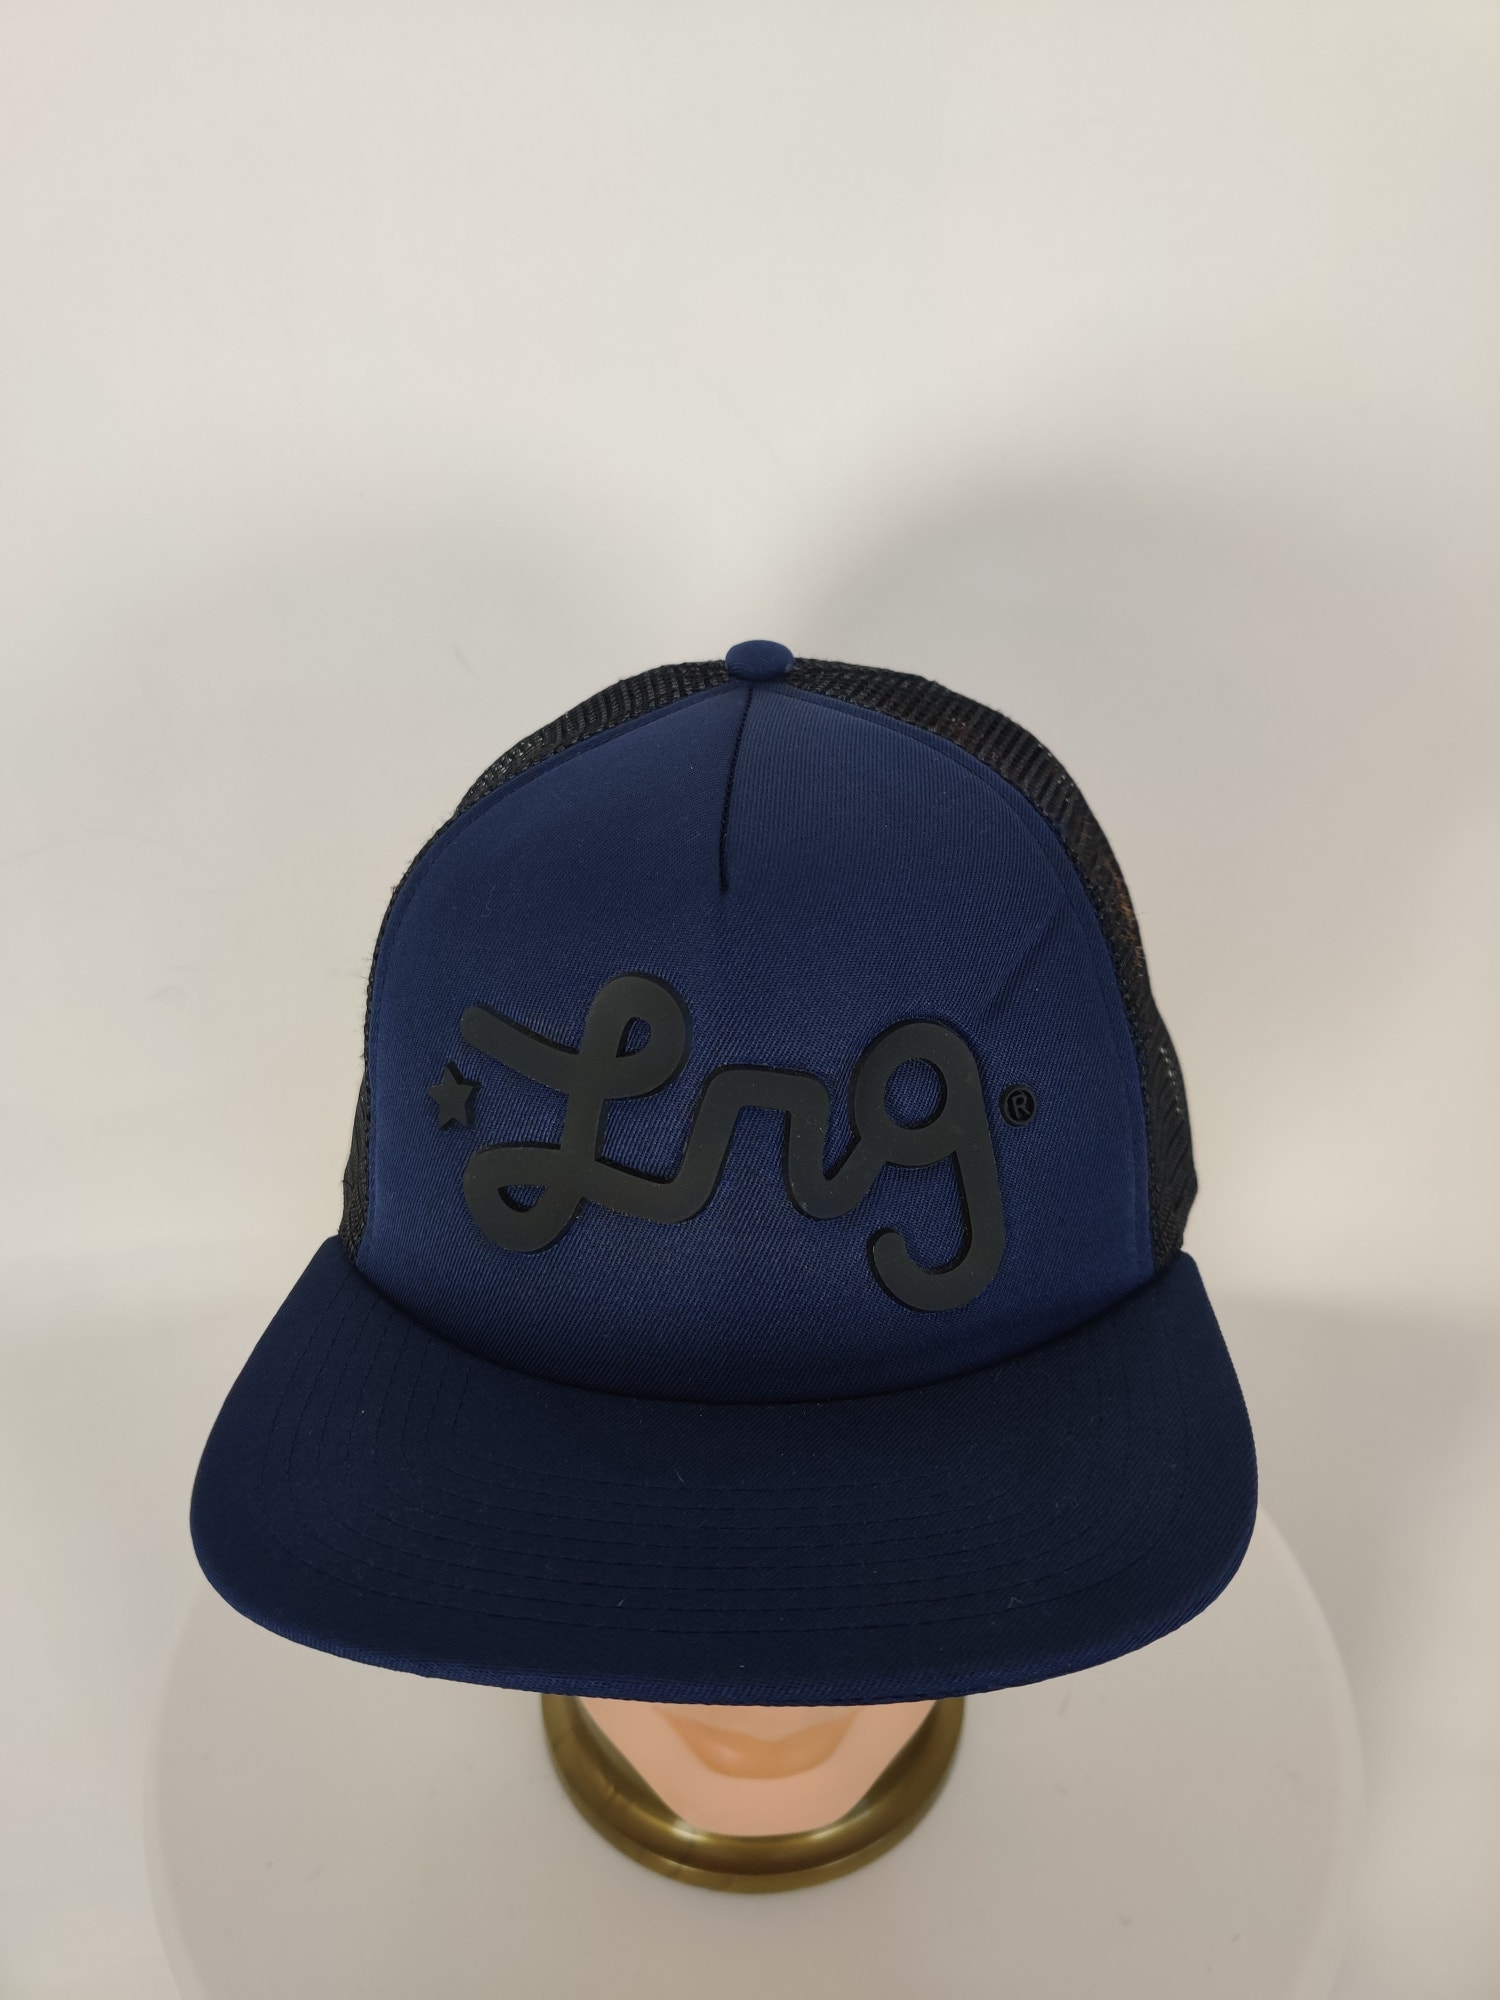 (V) ORIGINAL LRG Unisex hat hiking casual mesh back navy One size  - Picture 2 of 11